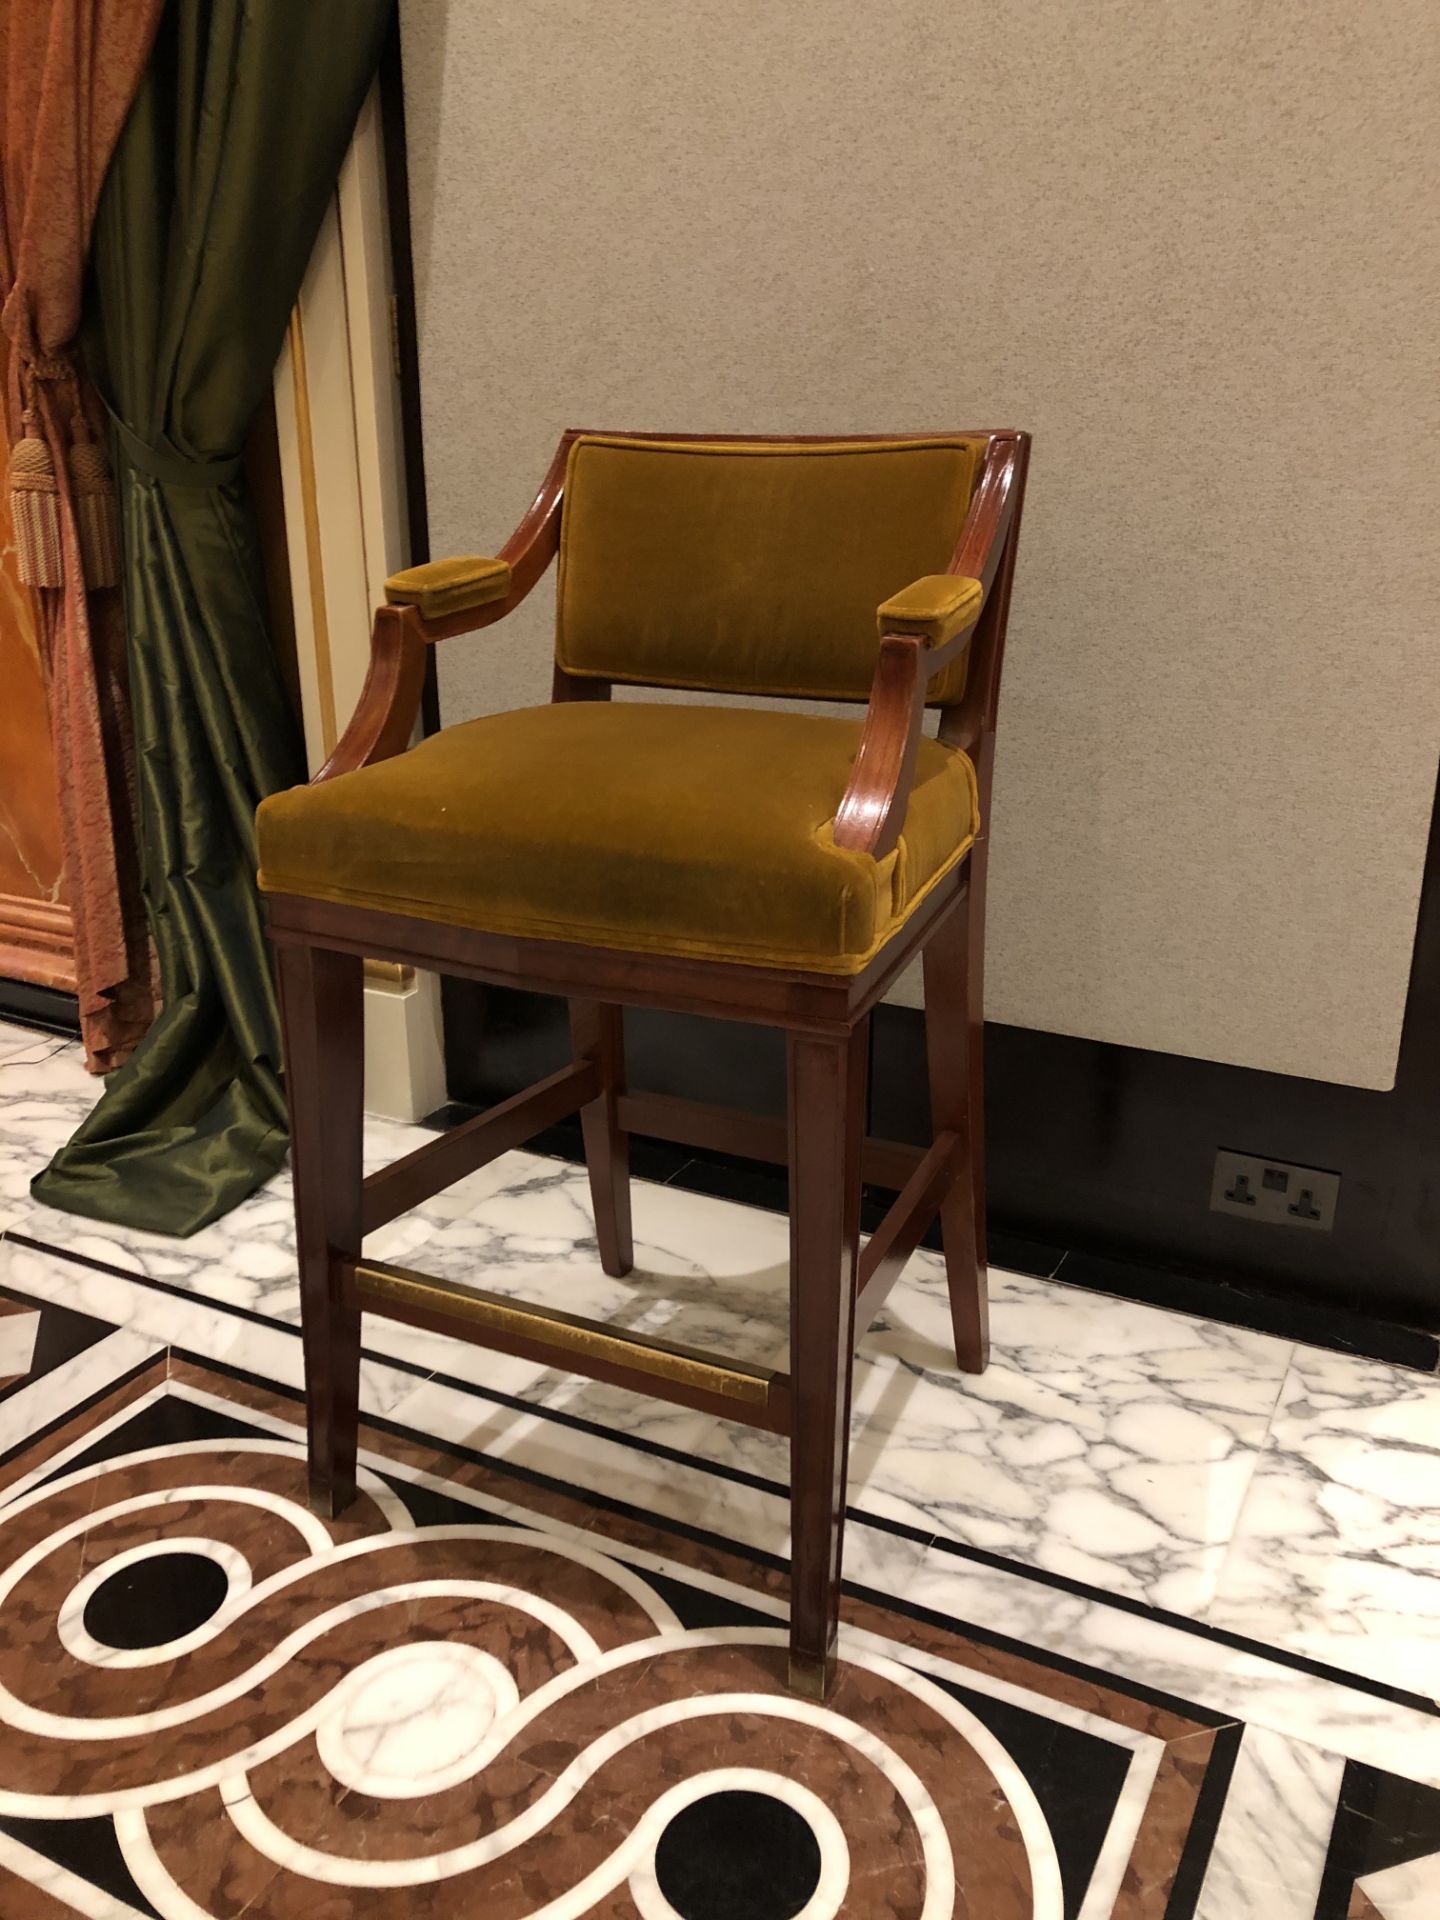 Neoclassic style mahogany tall bar stool, with a aged gold upholstered padded back and seat part